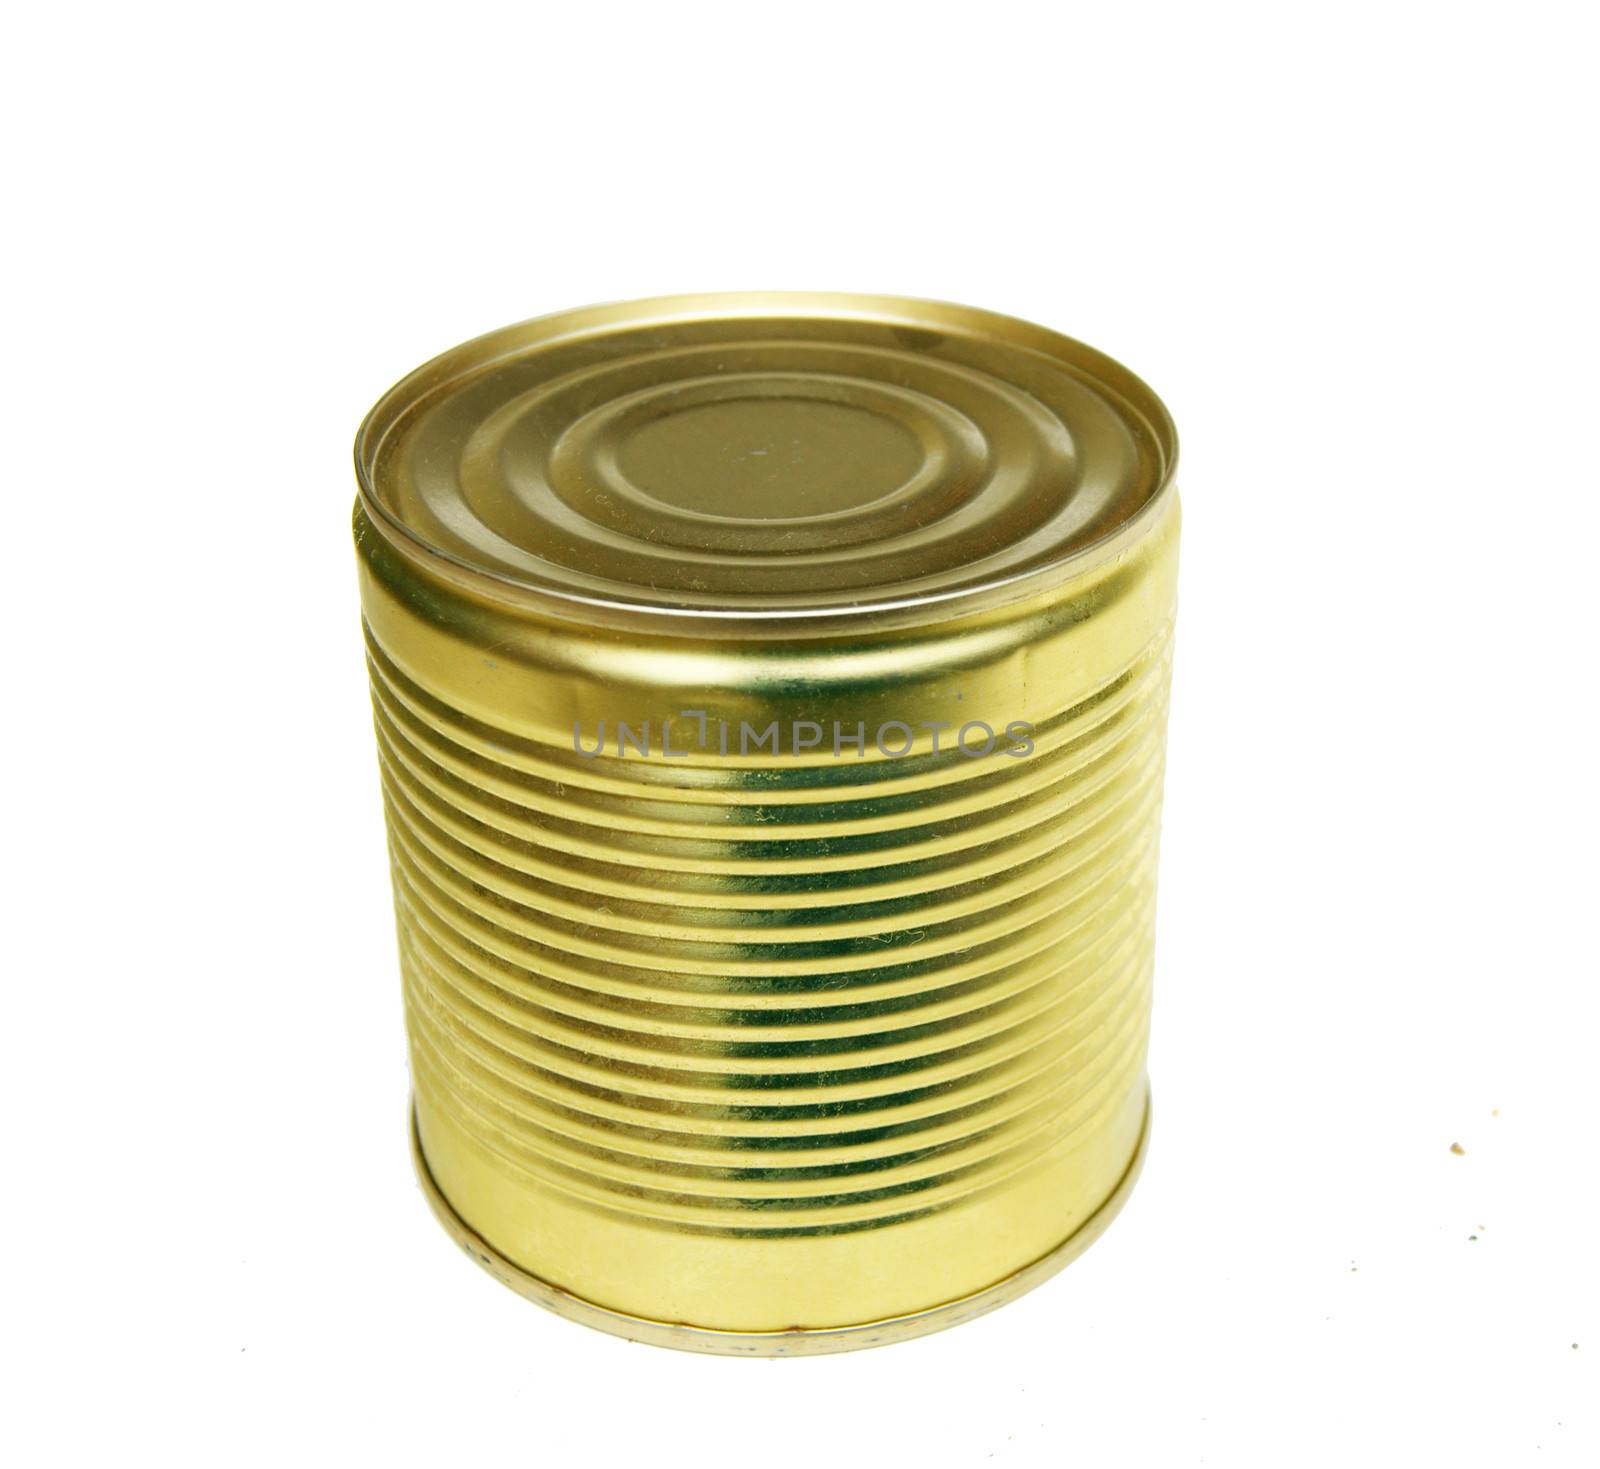 Tin with blank label by cobol1964